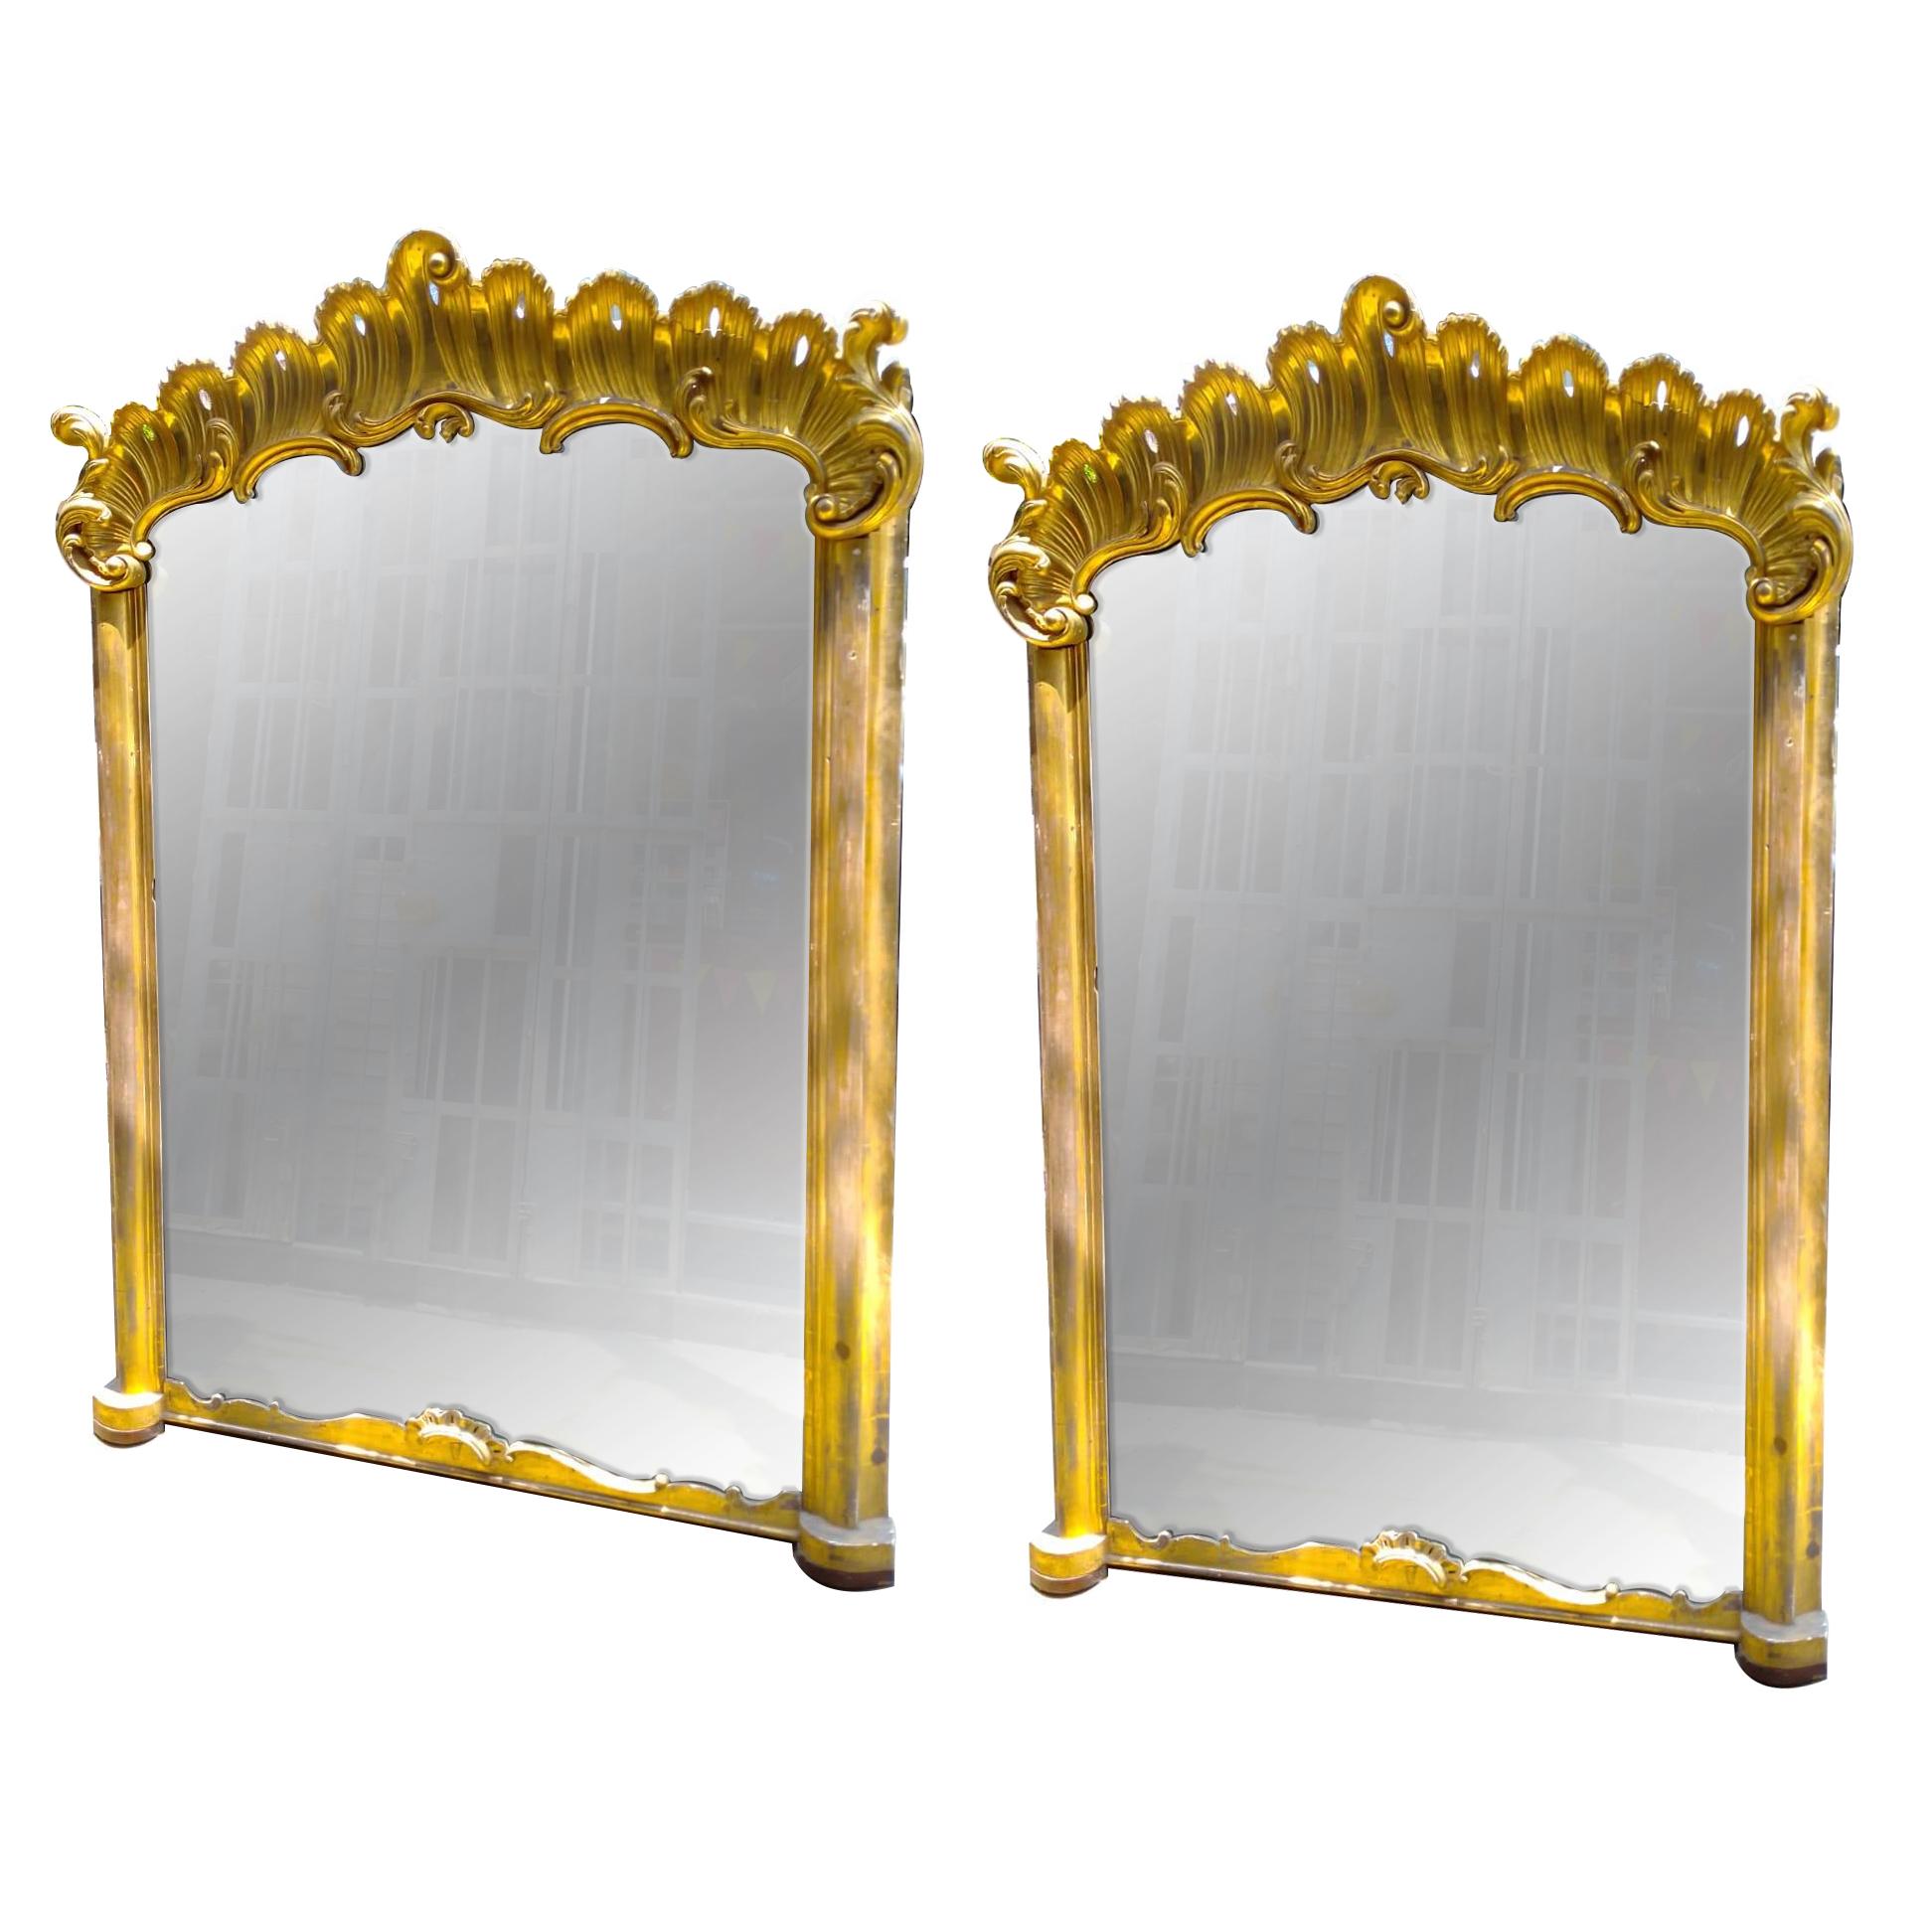 A pair of large circa 1900 giltwood French mirrors with original gilt finish and wood backs. Sold as pair.

Measurements:
Height 7 feet 5